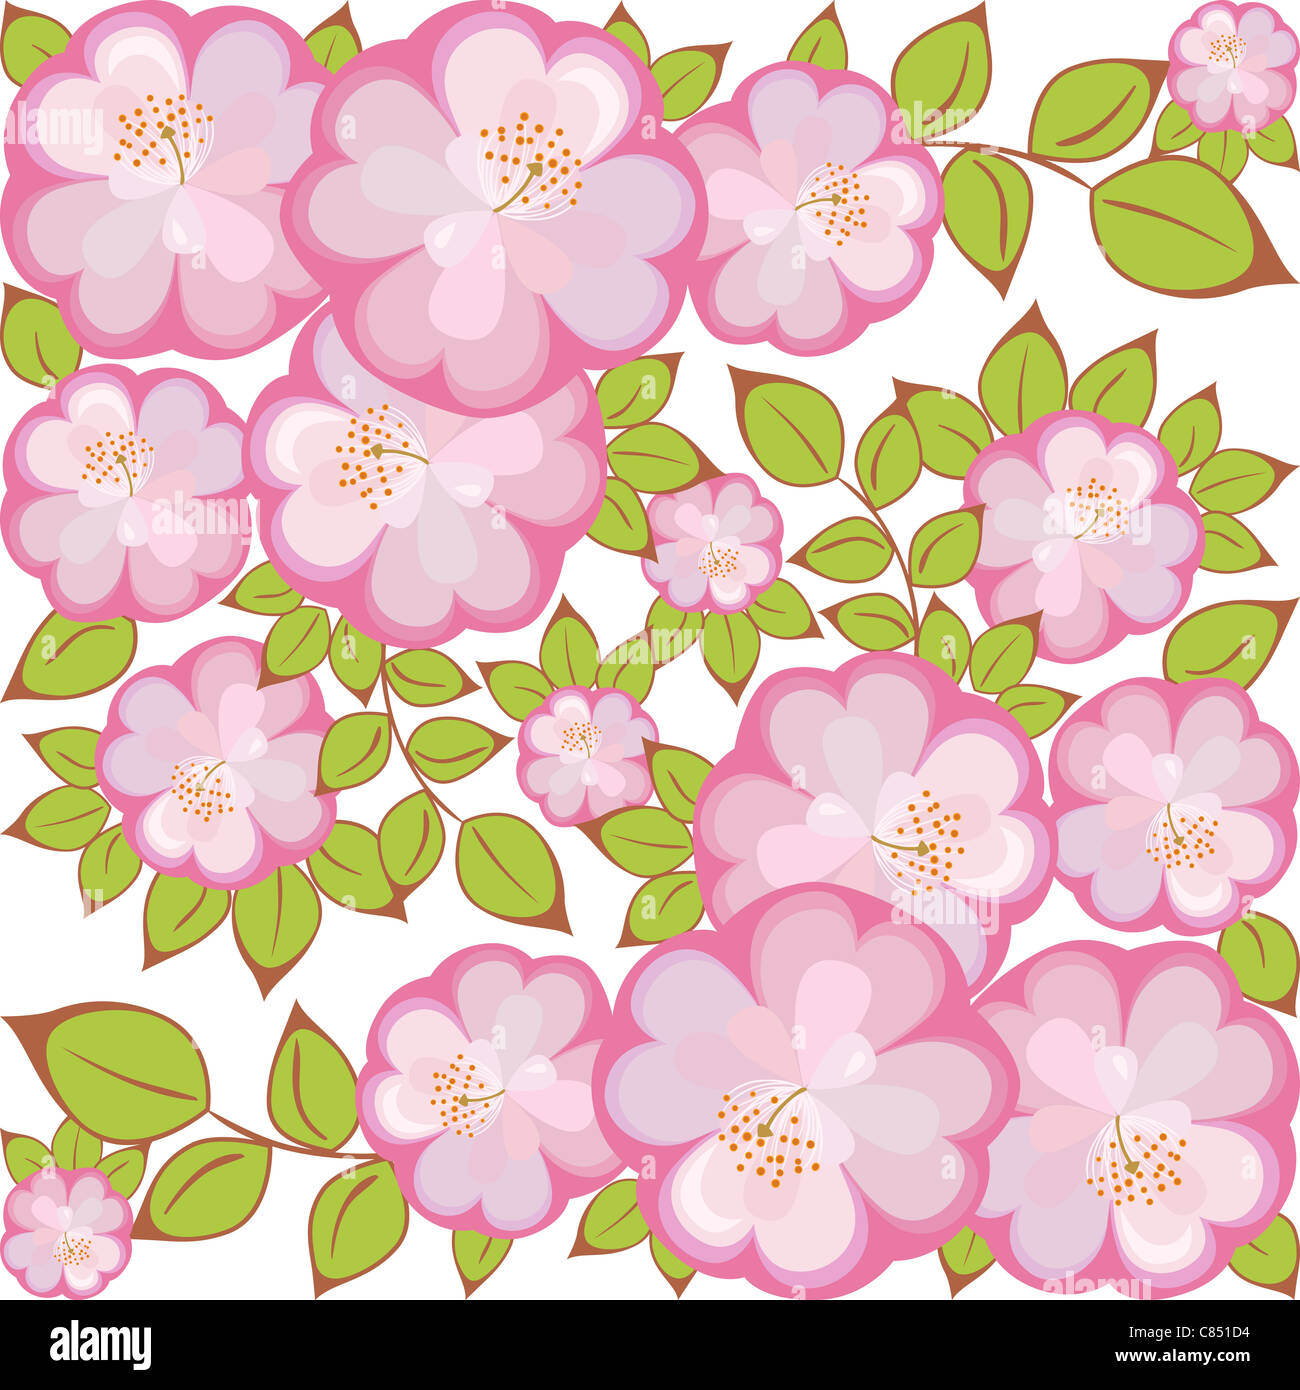 pattern of pink-purple flowers enclosed in a square Stock Photo